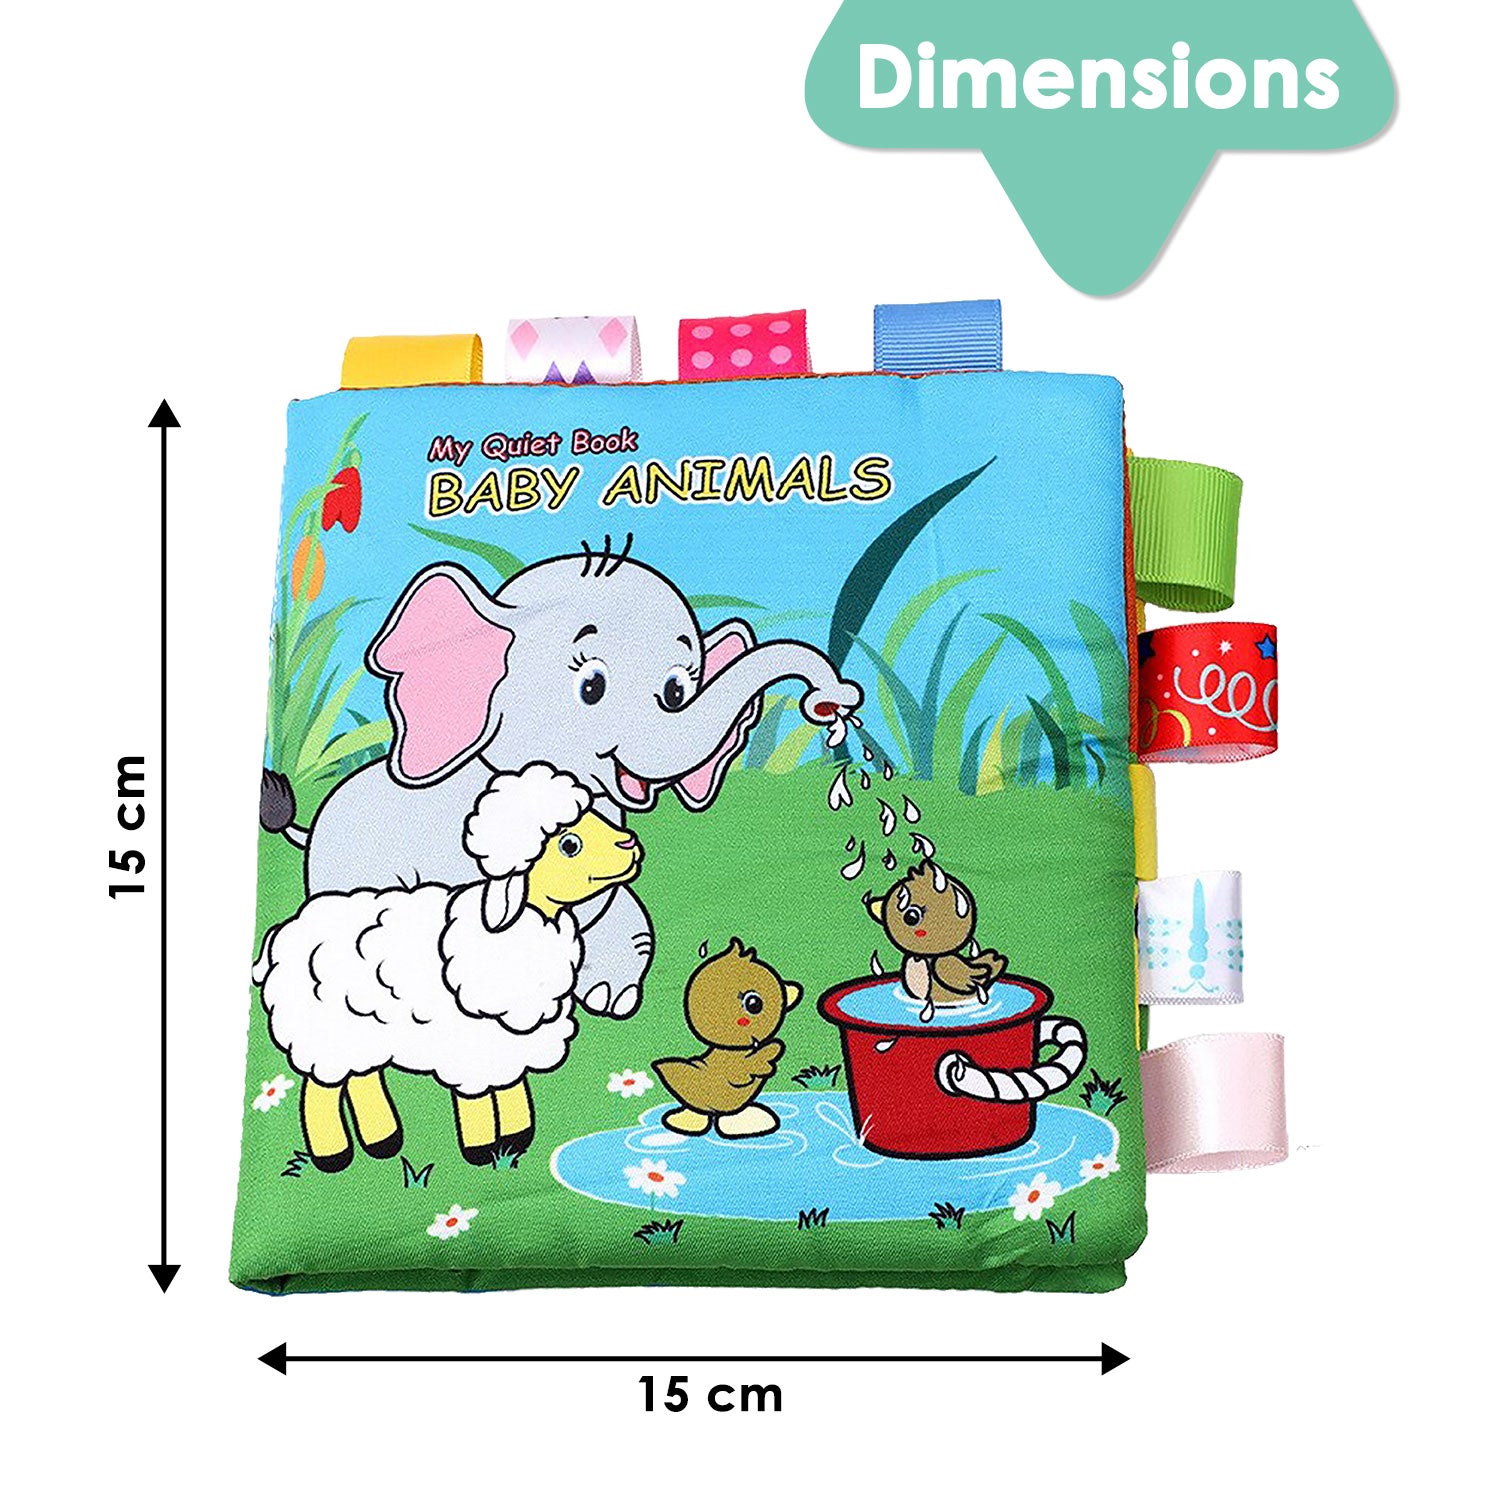 Baby Moo Baby Animals With Squeaker, Rattle And Rustle Paper Sound Cloth Book  - Blue